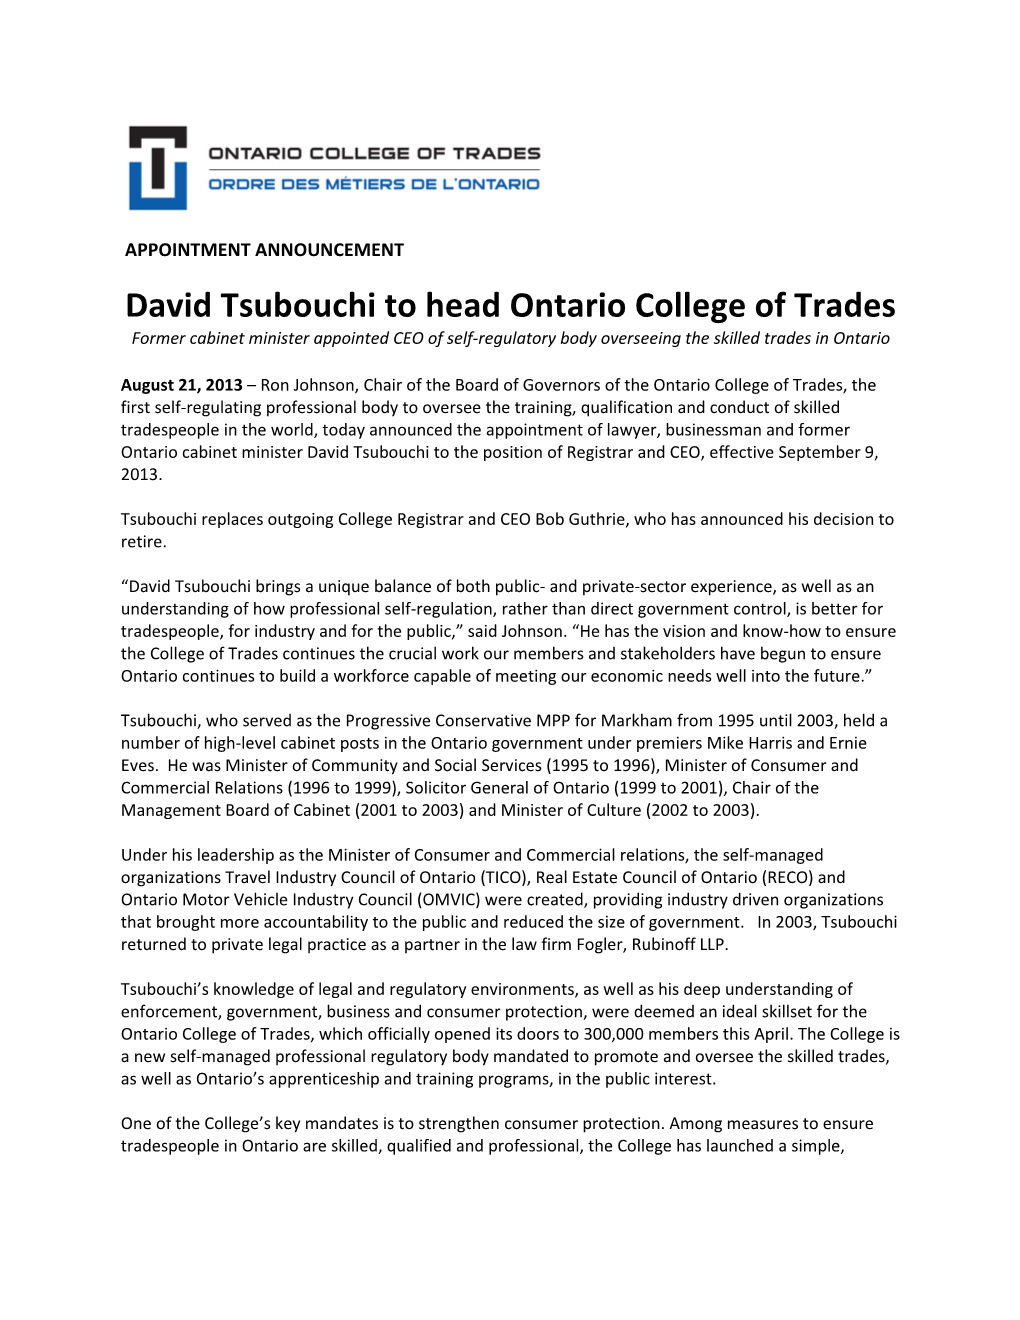 David Tsubouchi to Head Ontario College of Trades Former Cabinet Minister Appointed CEO of Self-Regulatory Body Overseeing the Skilled Trades in Ontario